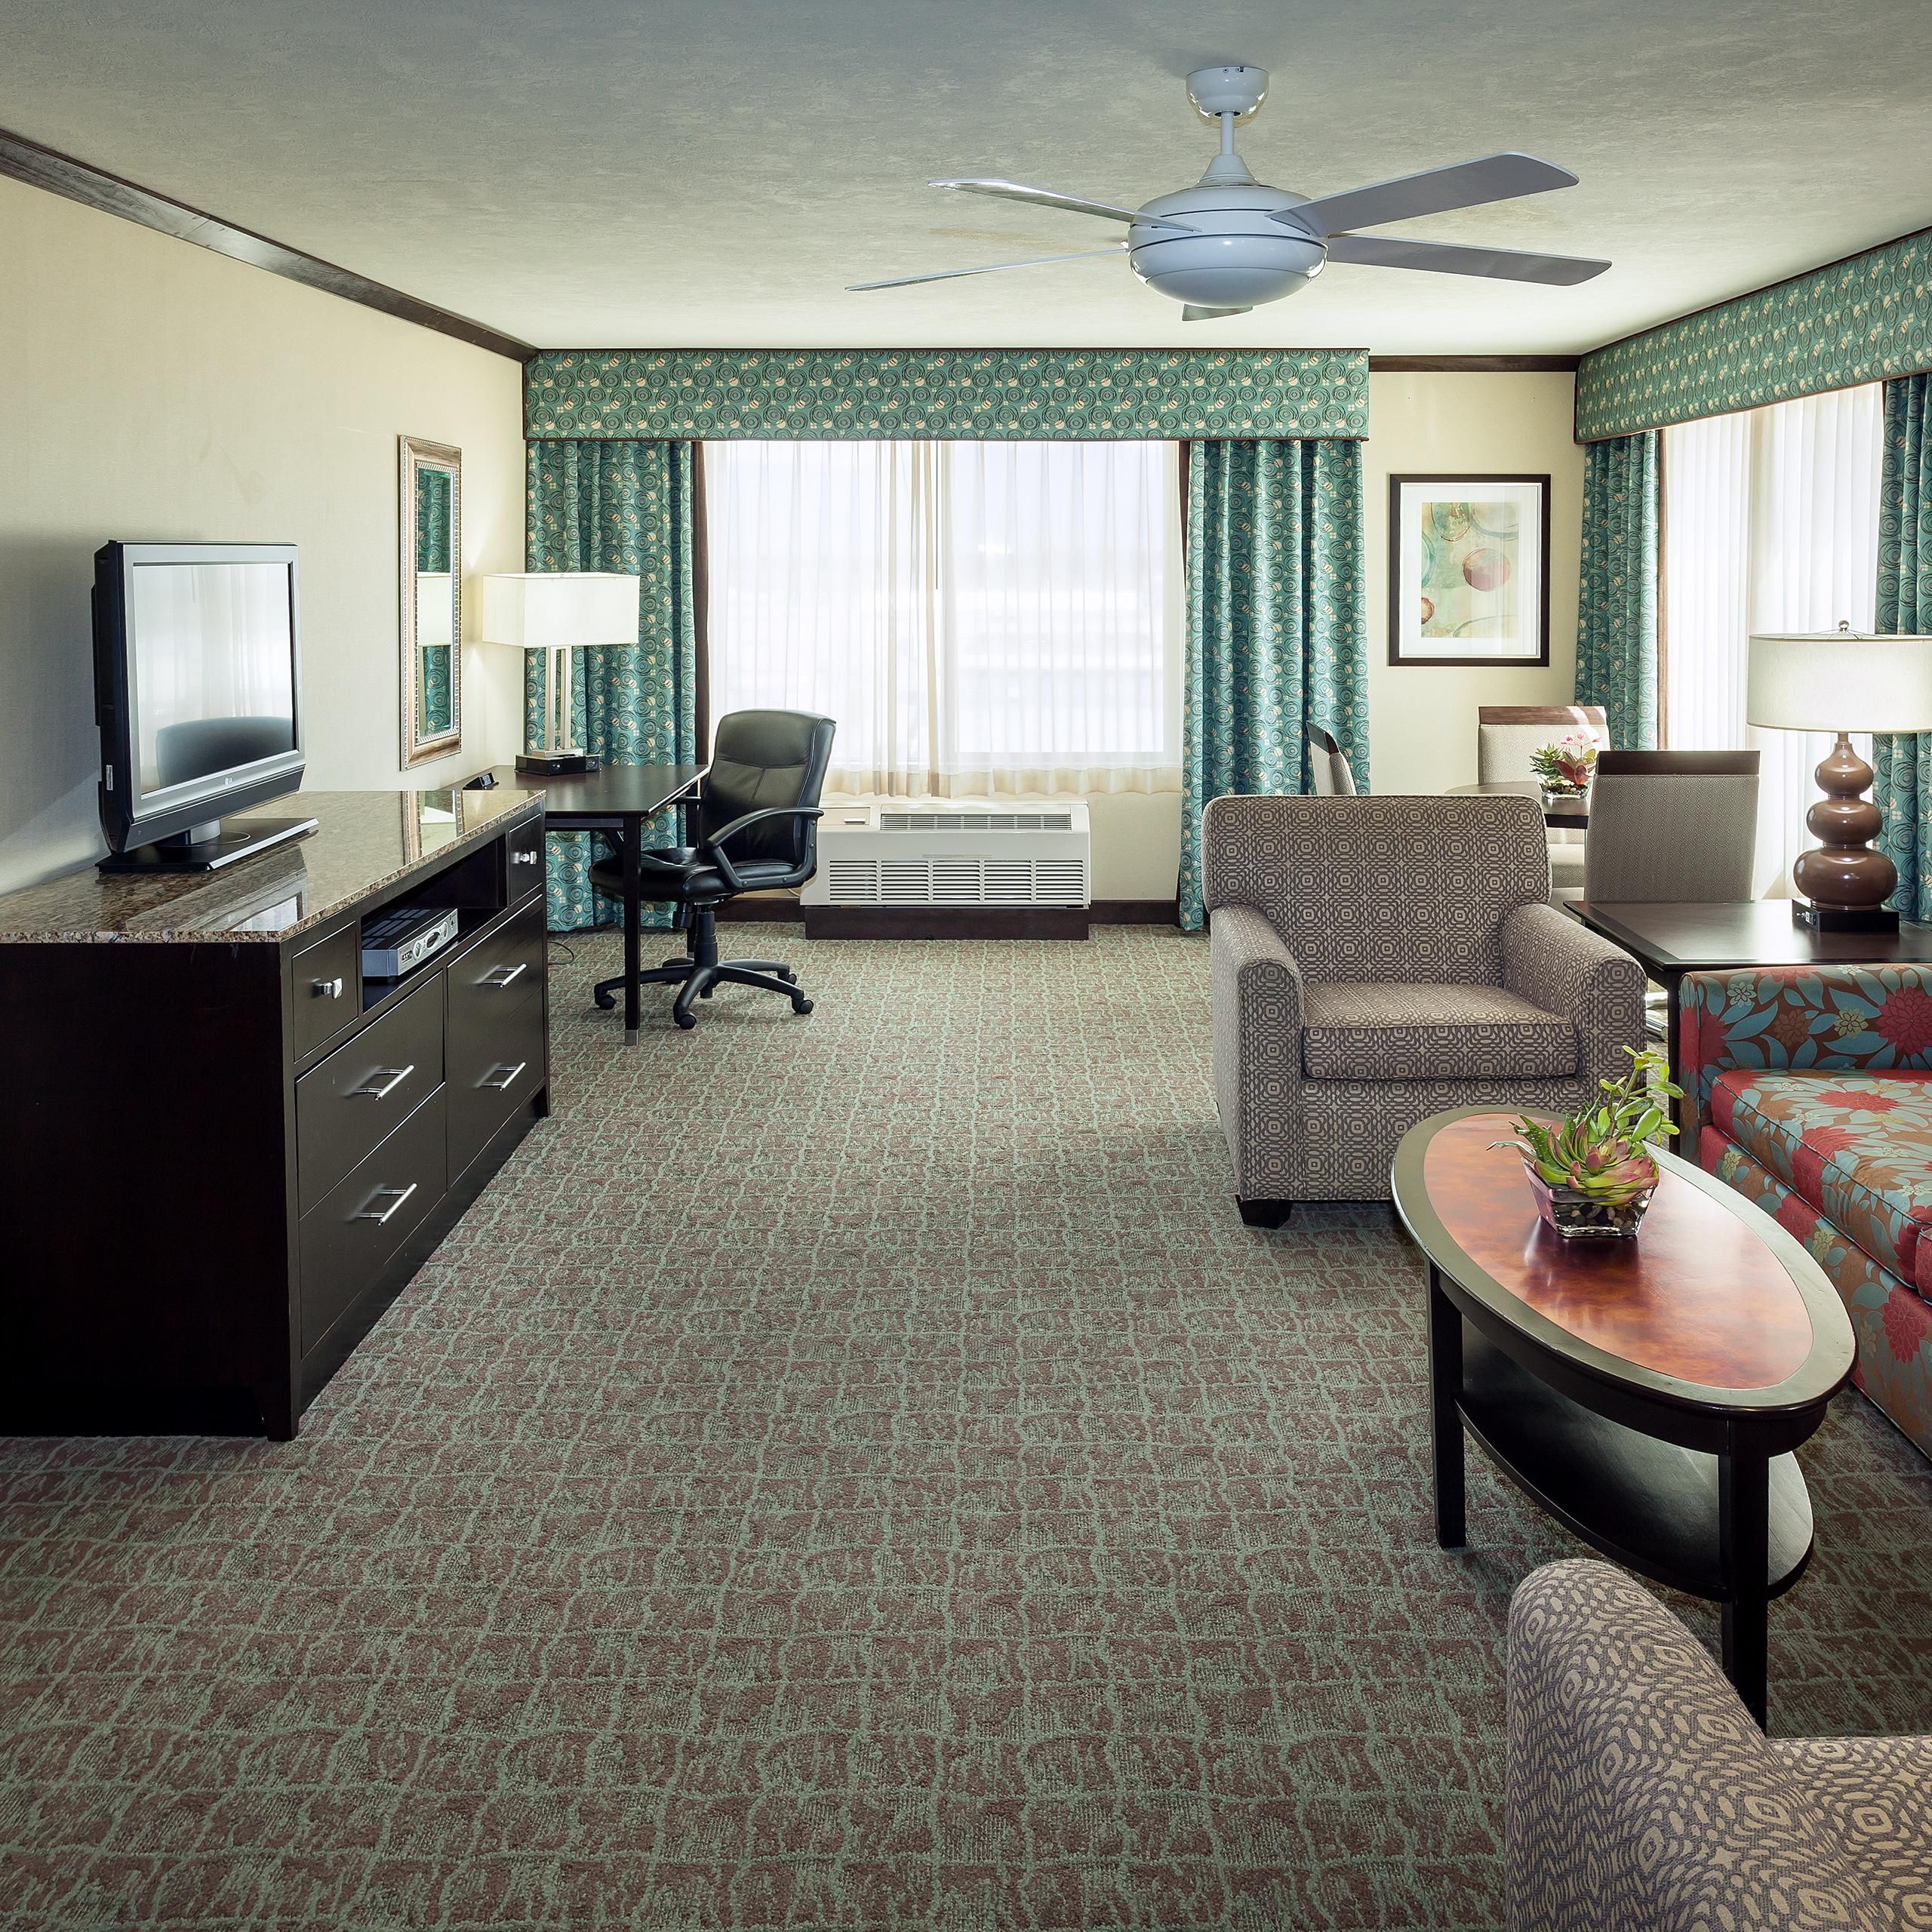 Our spacious guest suite is perfect for families